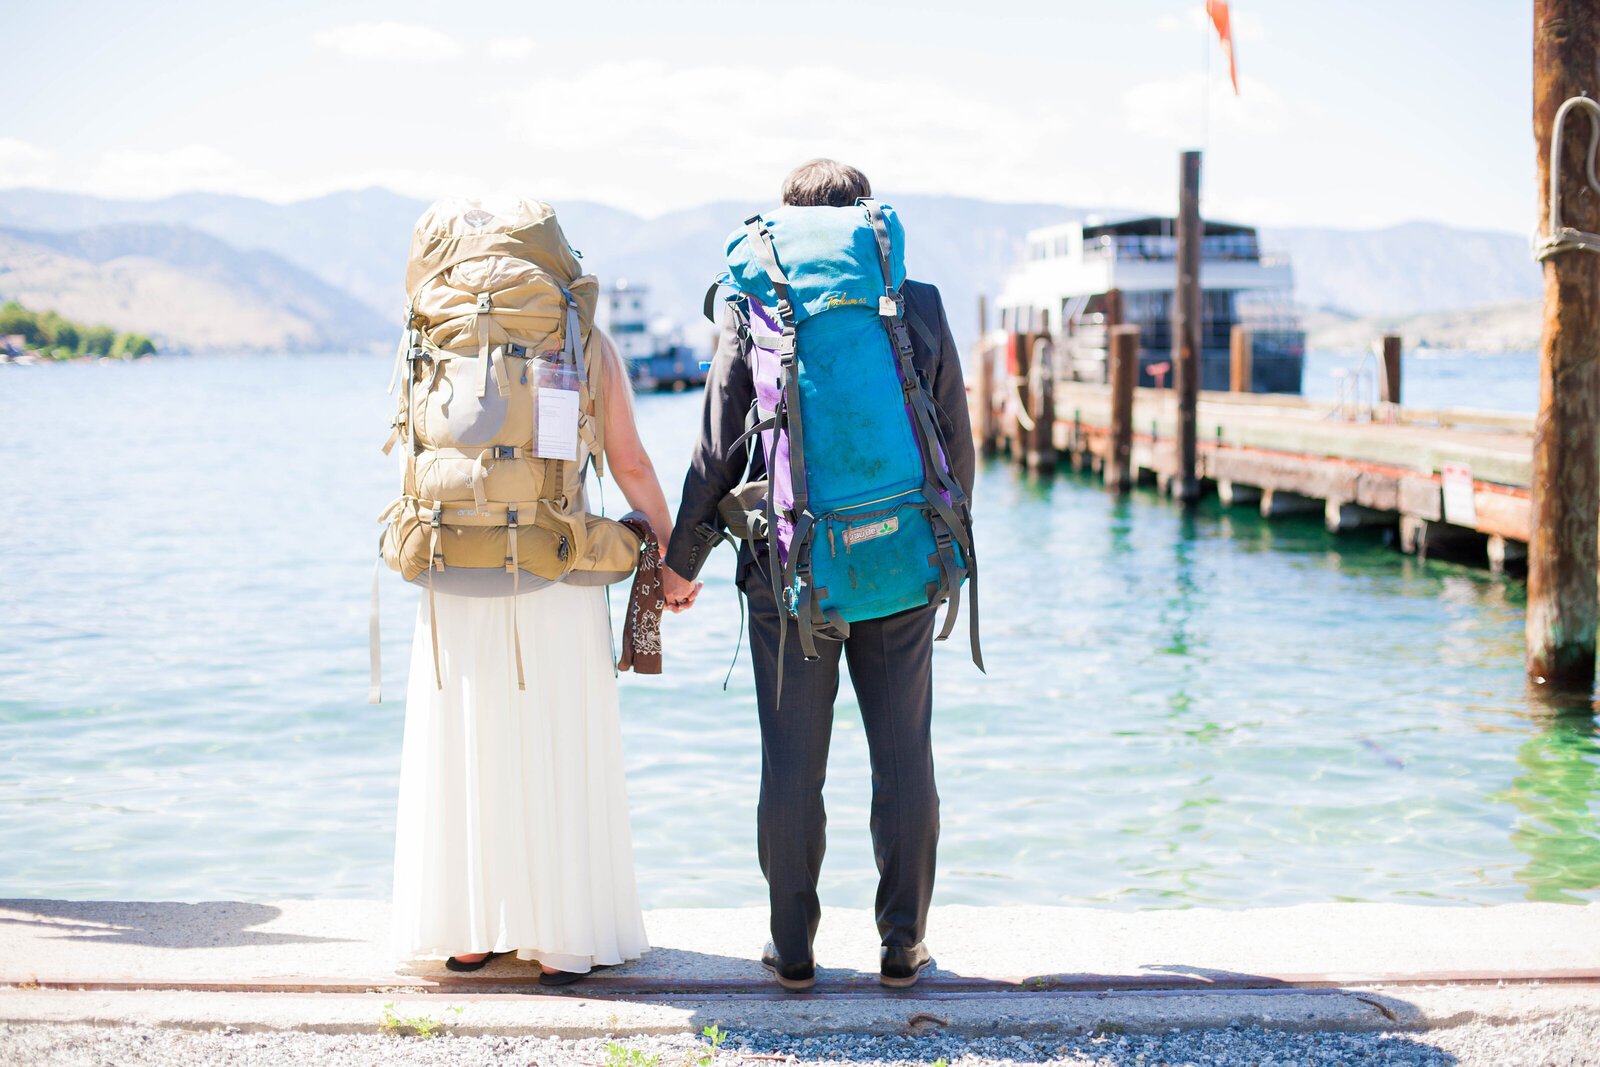 A bride wearing a wedding dress and a groom wearing a suit wearing backpacking gear.